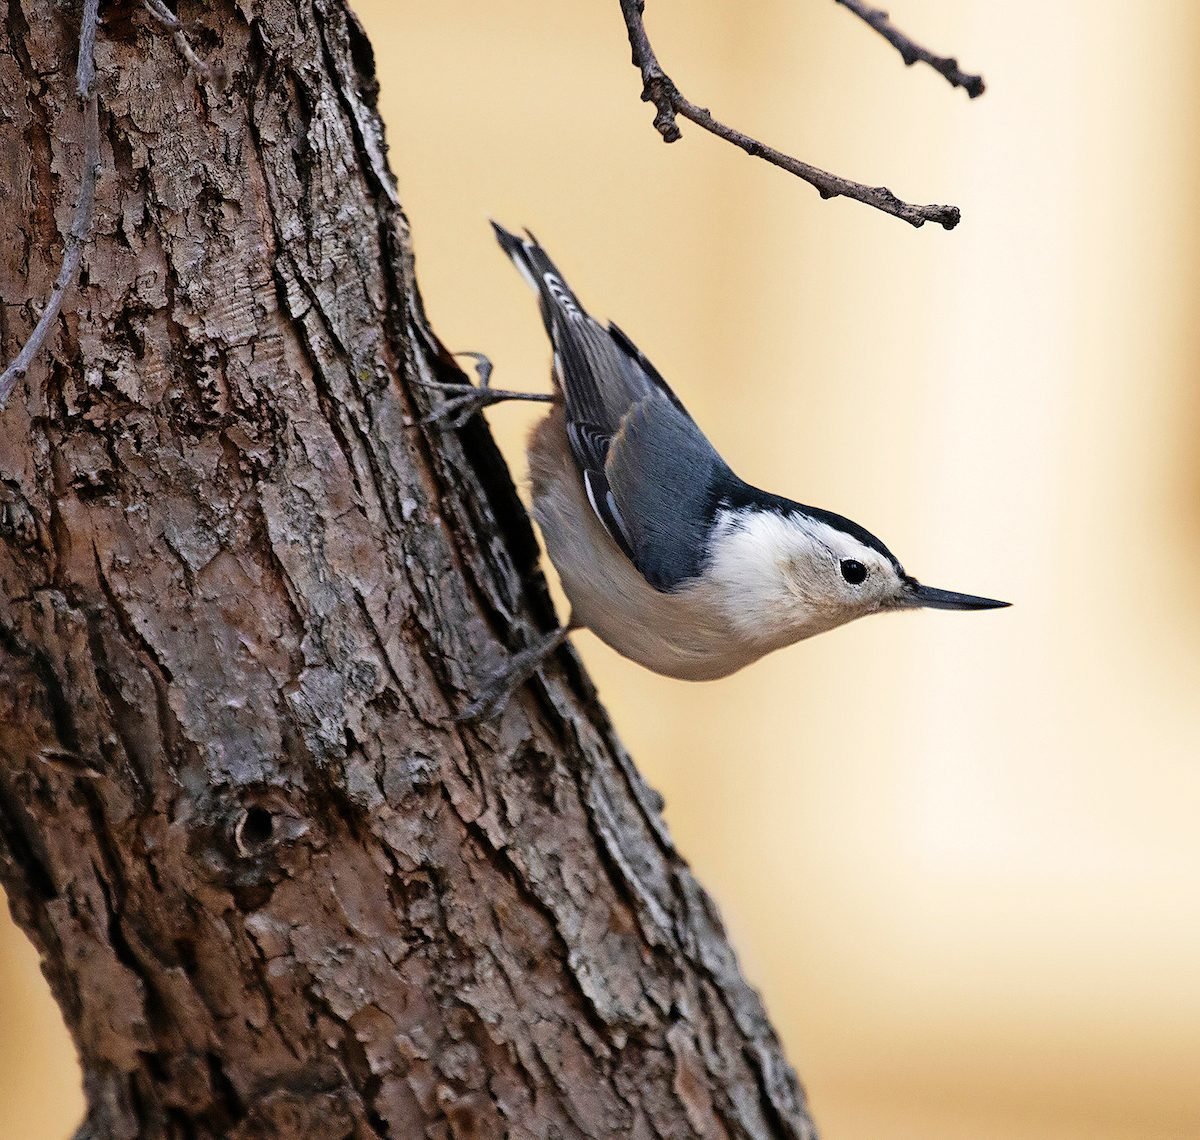 How to Identify a White-Breasted Nuthatch